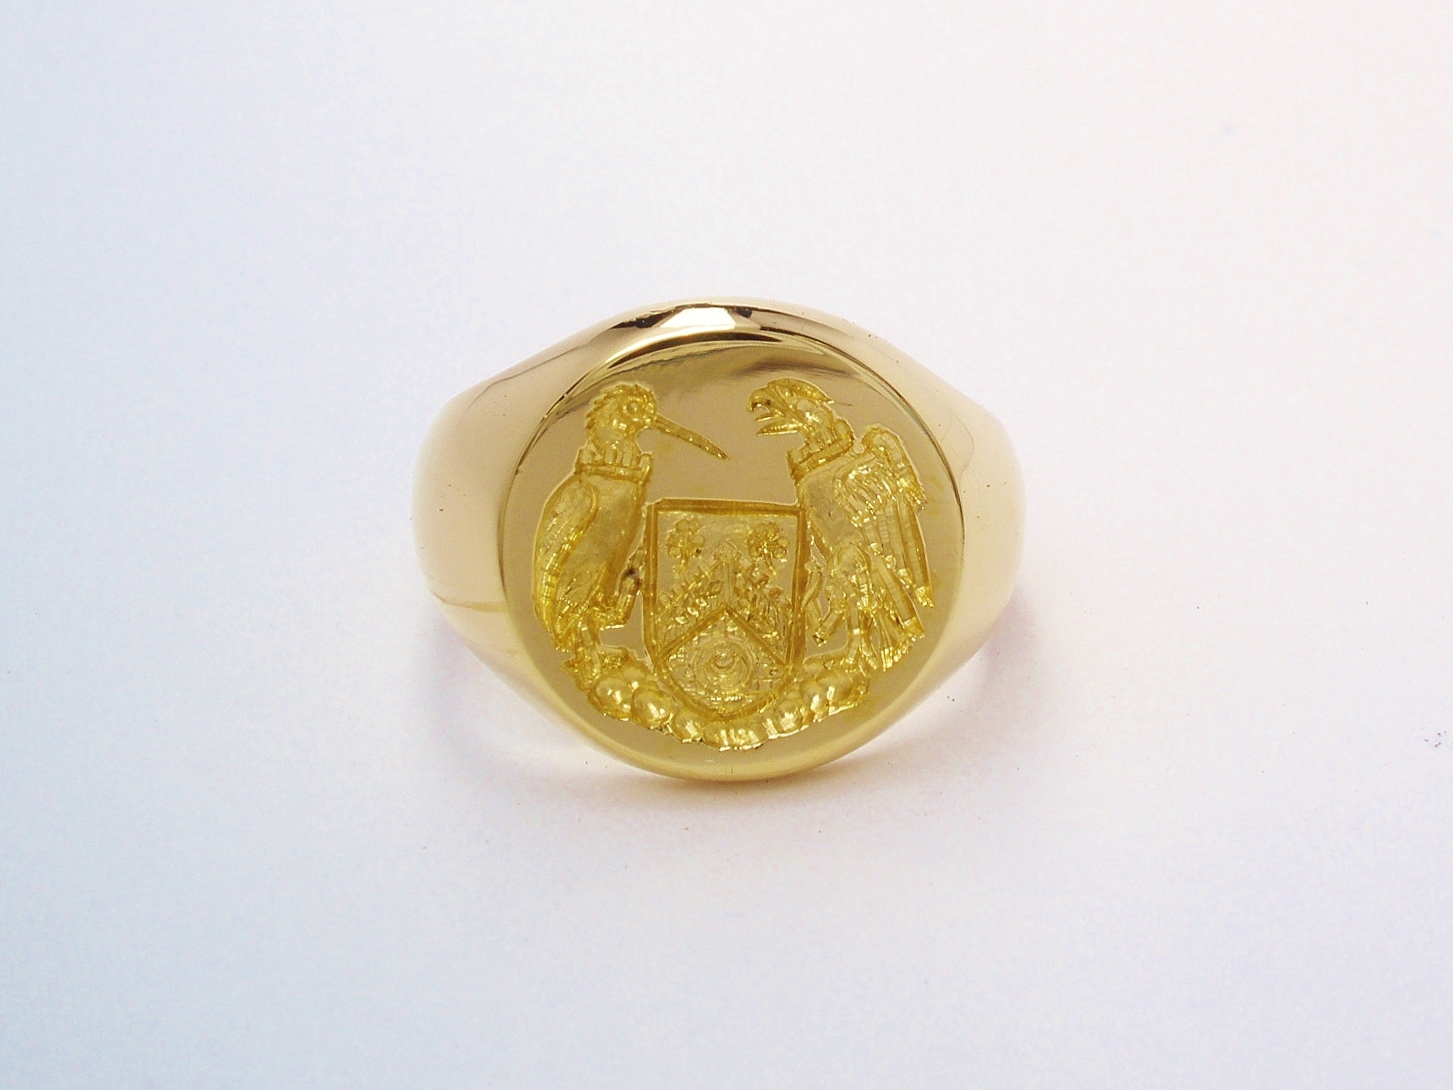 A 9ct. yellow gold round signet ring with a hand carved seal engraving, engraved as a mirror image.